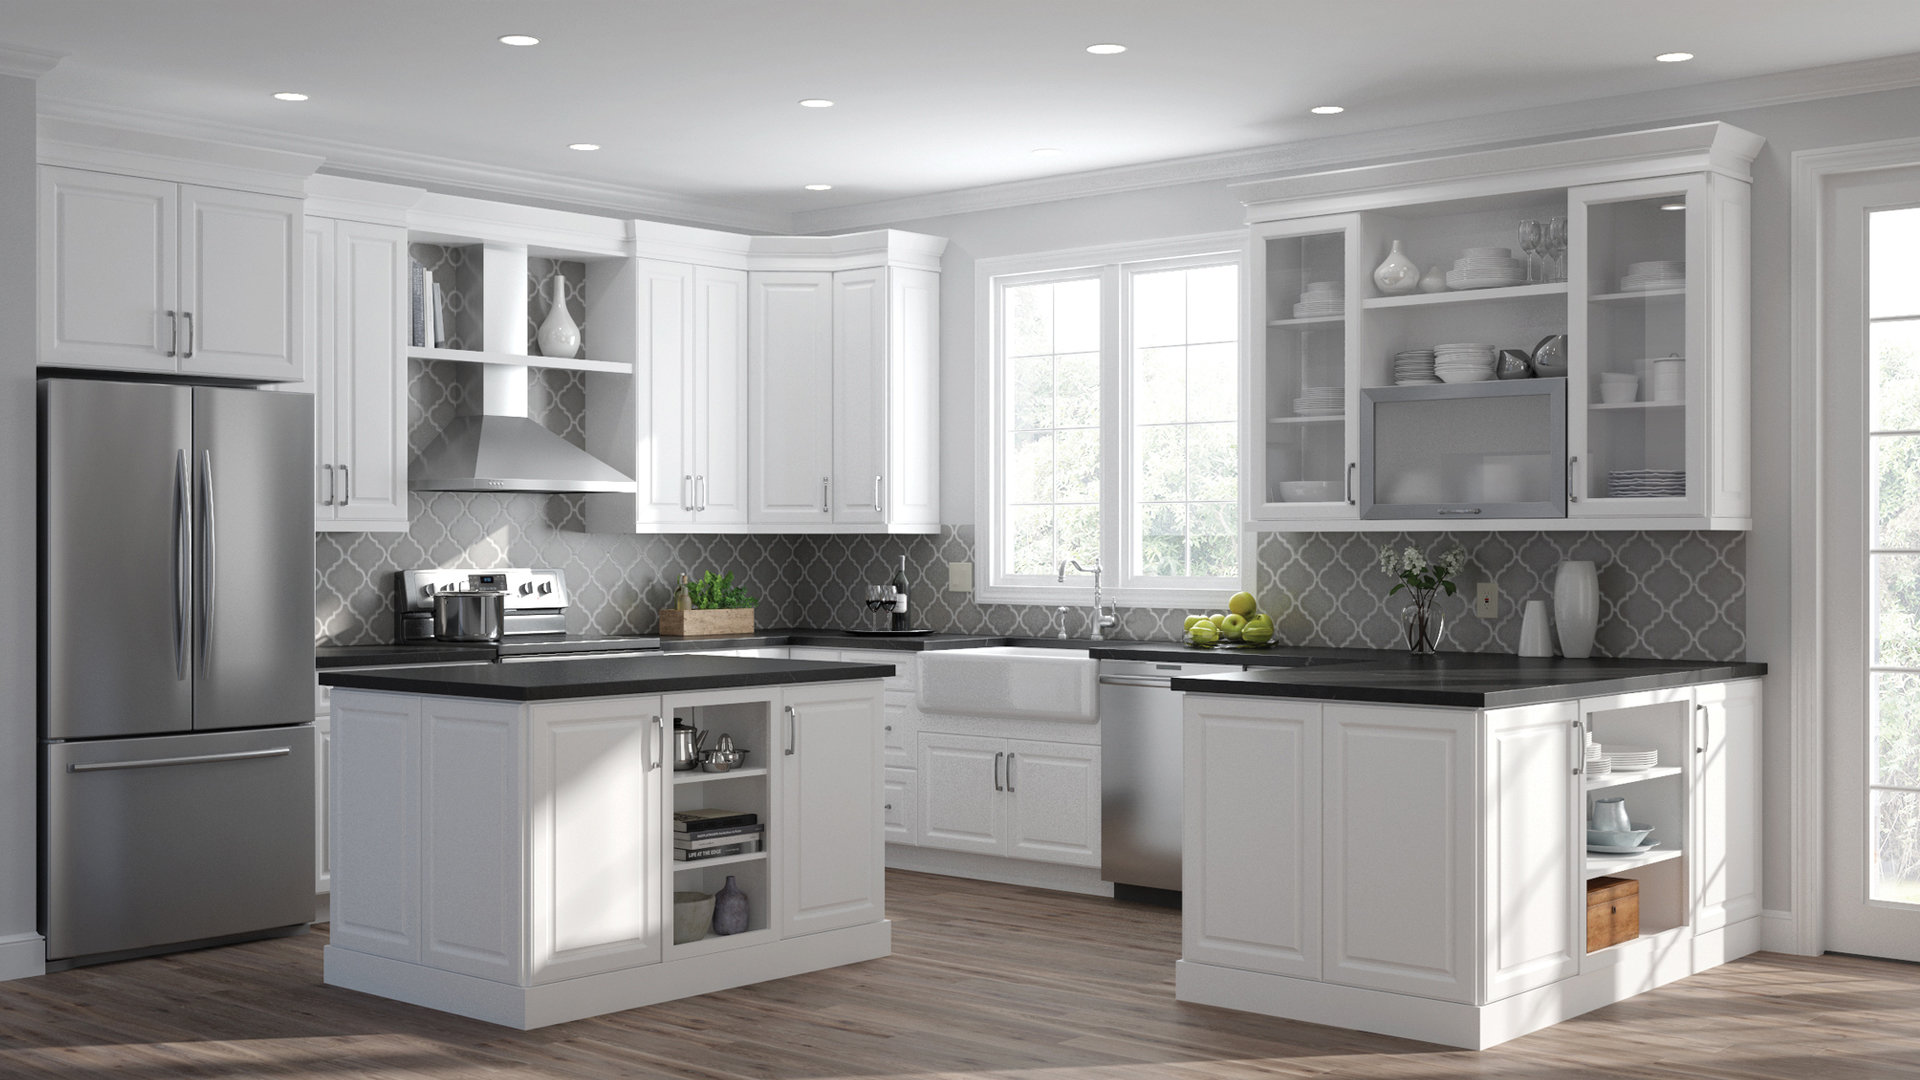 Elgin Wall Cabinets In White Kitchen, How Much Does A Kitchen Designer Make At Home Depot